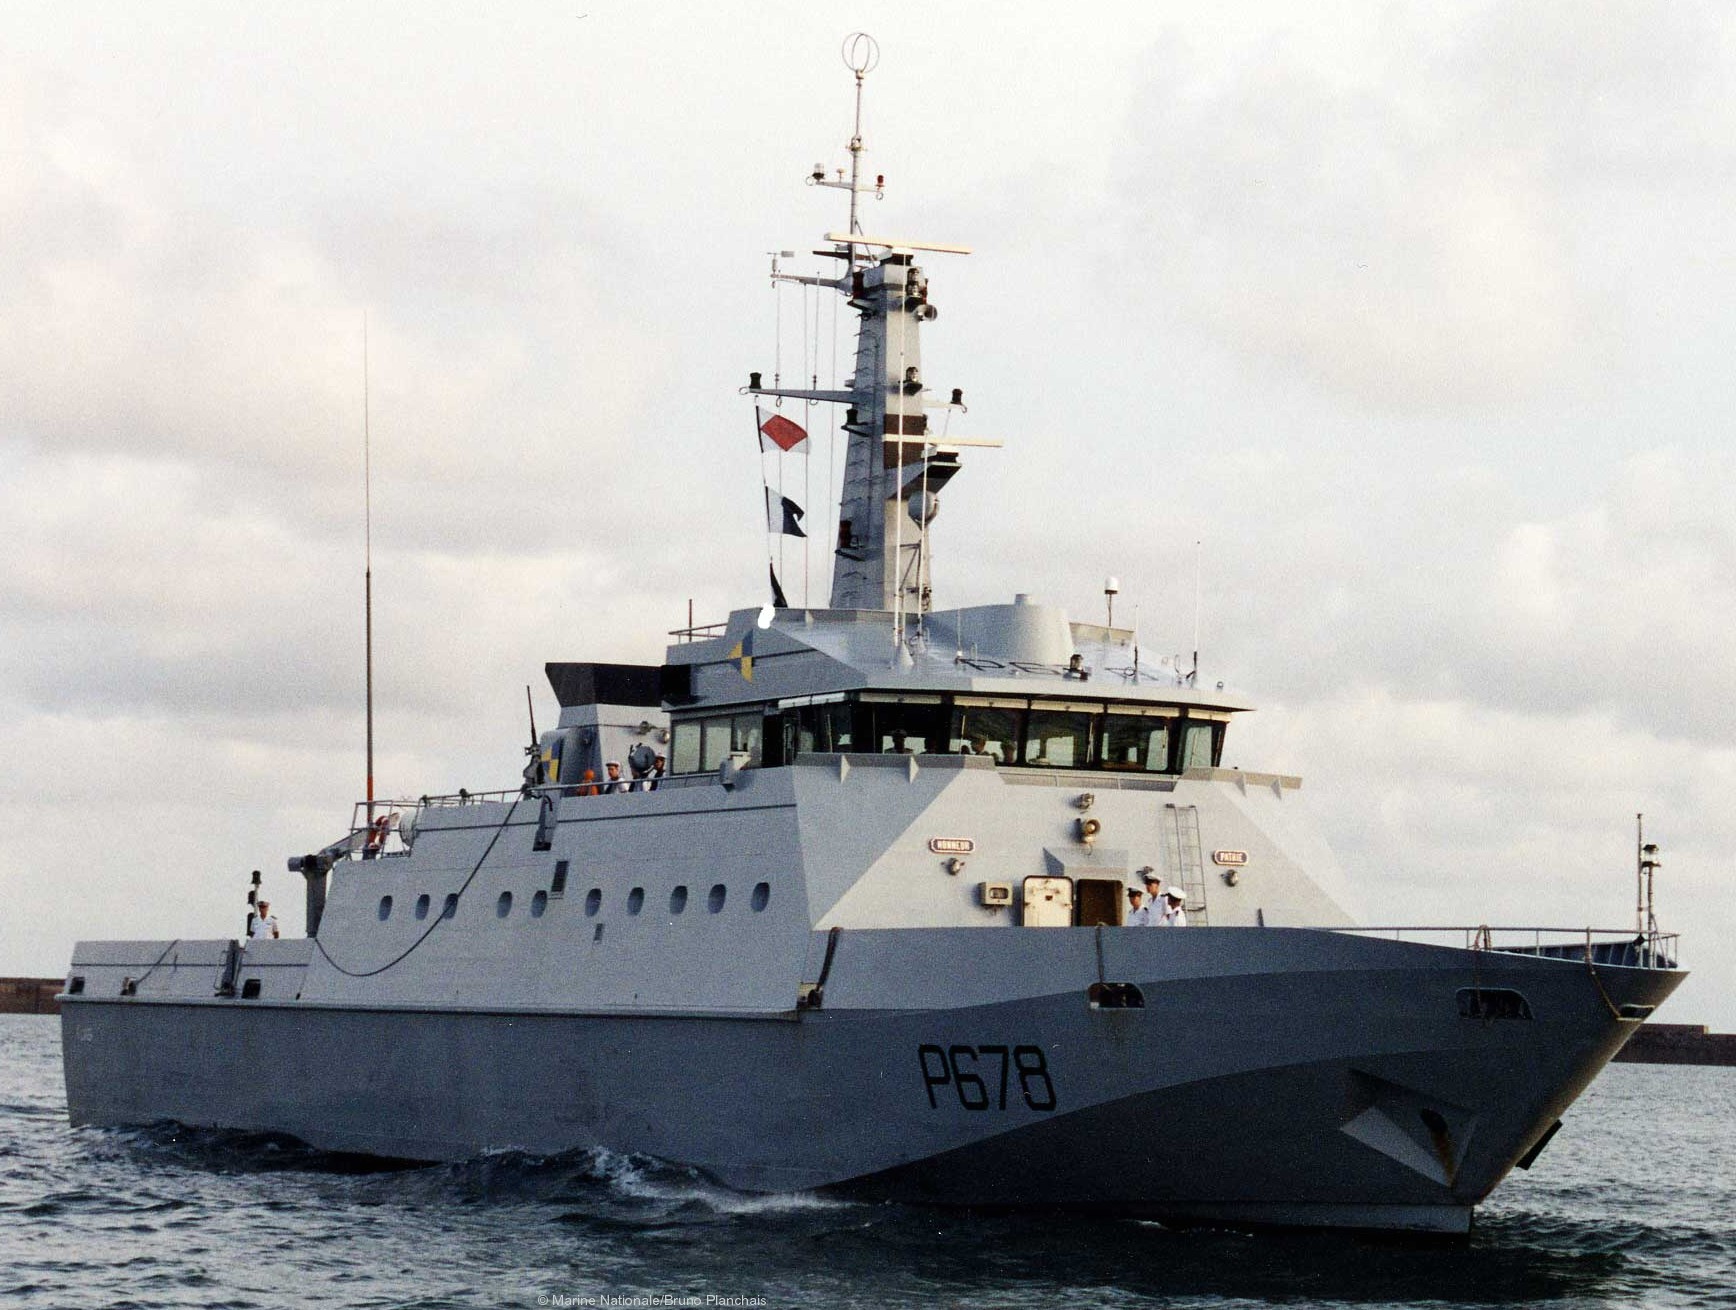 p-678 pluvier flamant class offshore patrol vessel opv french navy patrouilleur marine nationale 03